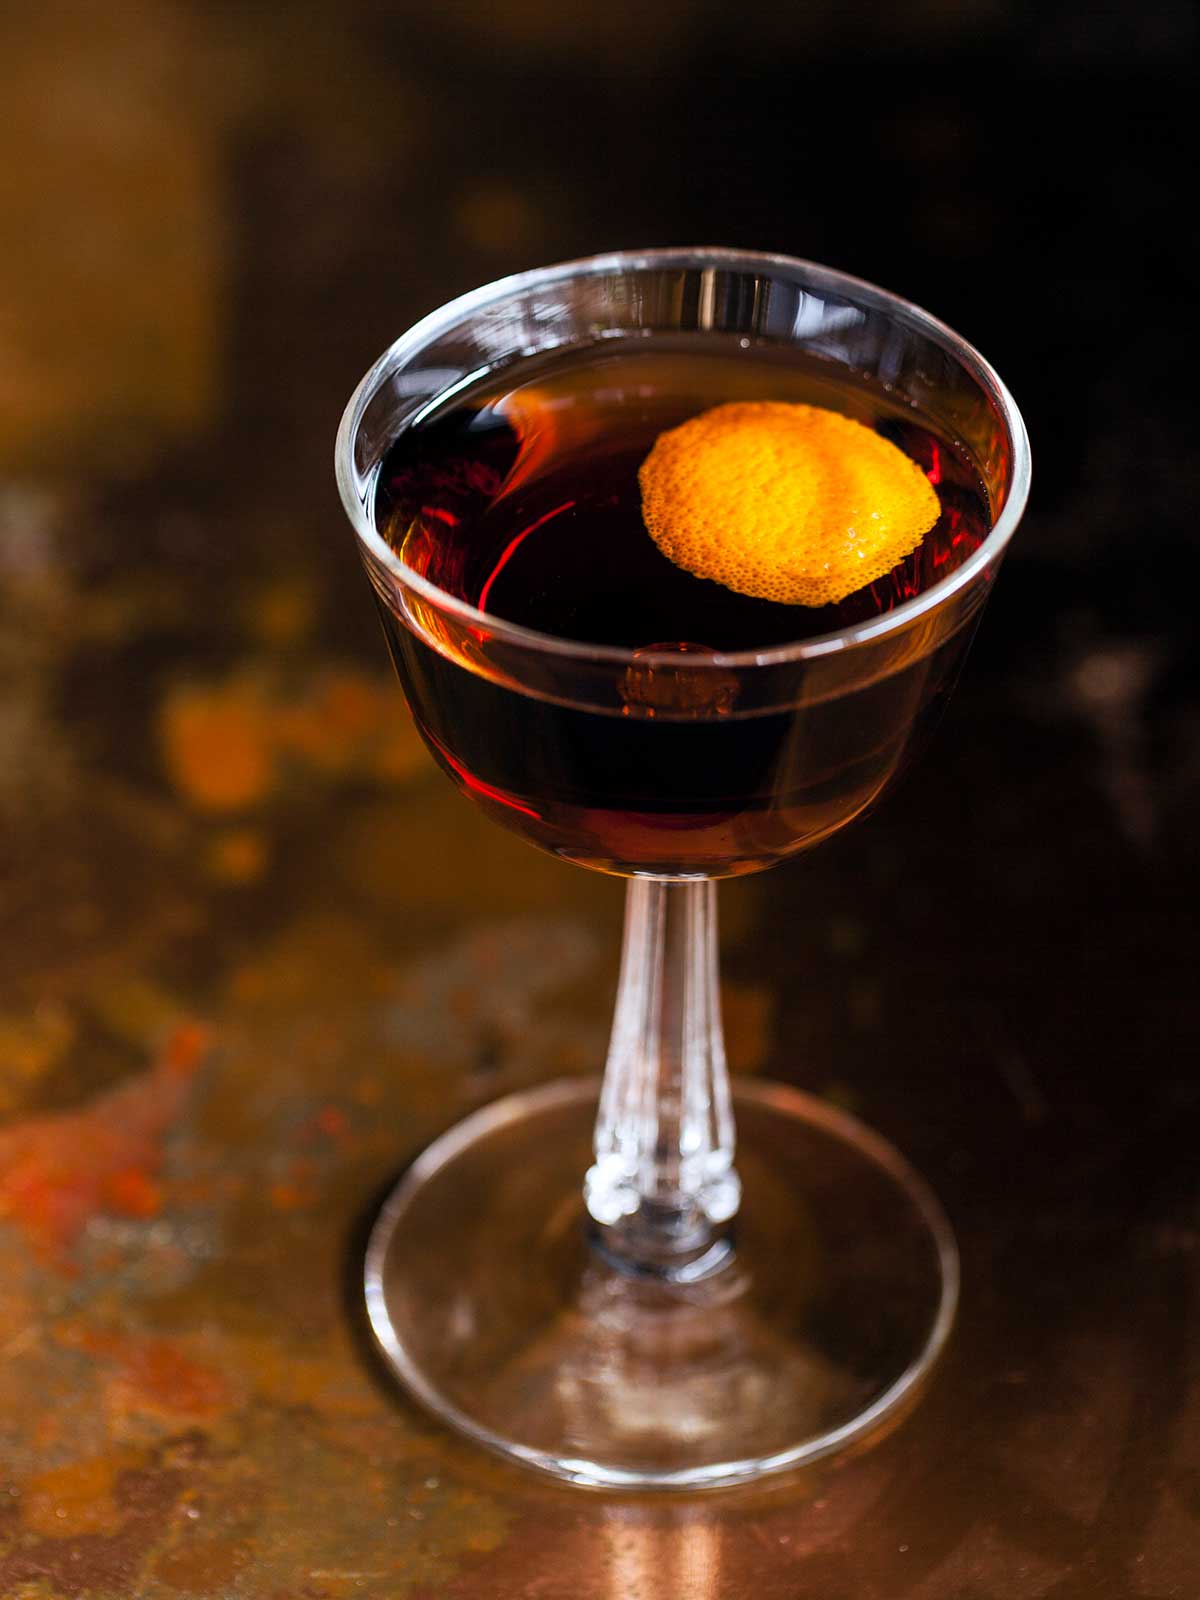 A coupe glass filled with a revolver cocktail, garnished with orange peel.